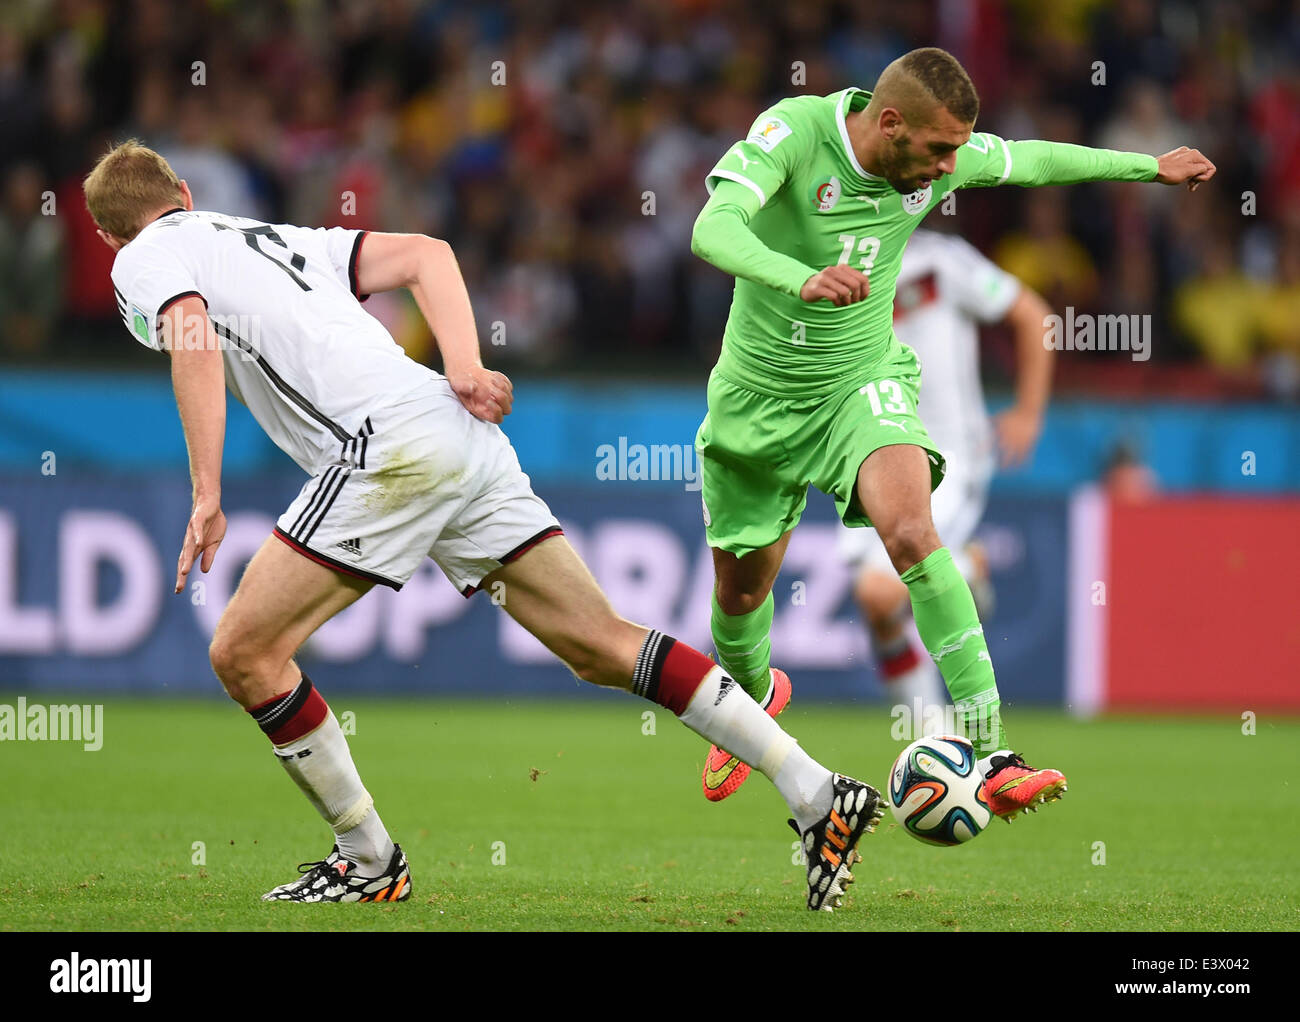 Porto Alegre, Brazil. 30th June, 2014. Germany's Per Mertesacker (L) vies with Algeria's Islam Slimani during a Round of 16 match between Germany and Algeria of 2014 FIFA World Cup at the Estadio Beira-Rio Stadium in Porto Alegre, Brazil, on June 30, 2014. Credit:  Li Ga/Xinhua/Alamy Live News Stock Photo